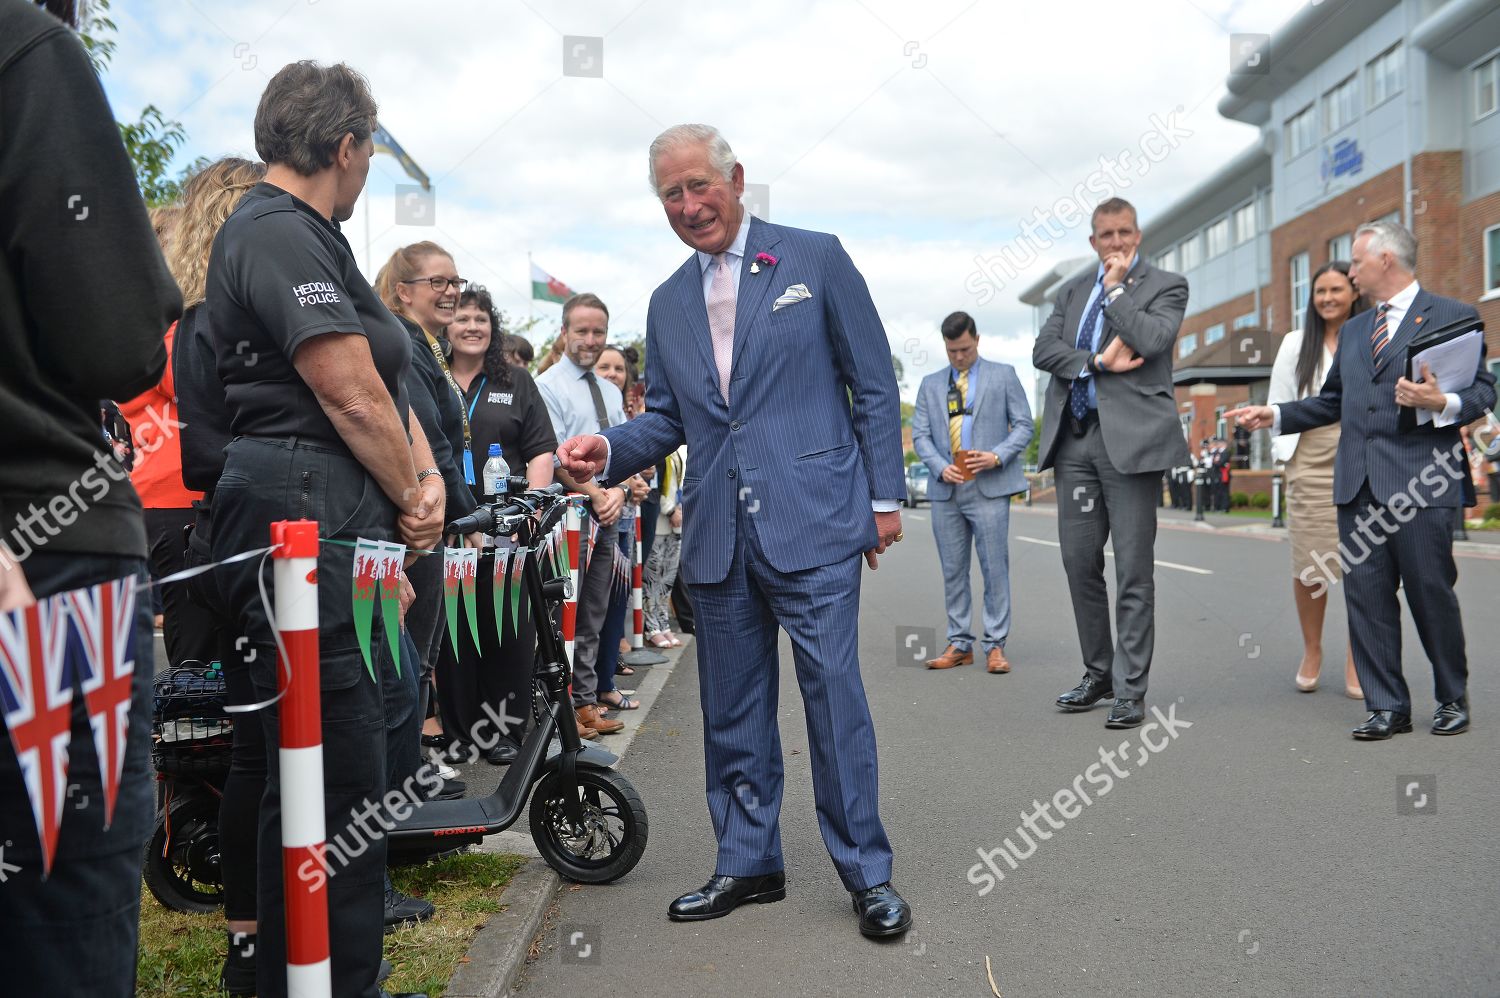 prince-charles-visit-to-wales-uk-shutterstock-editorial-10326139i.jpg